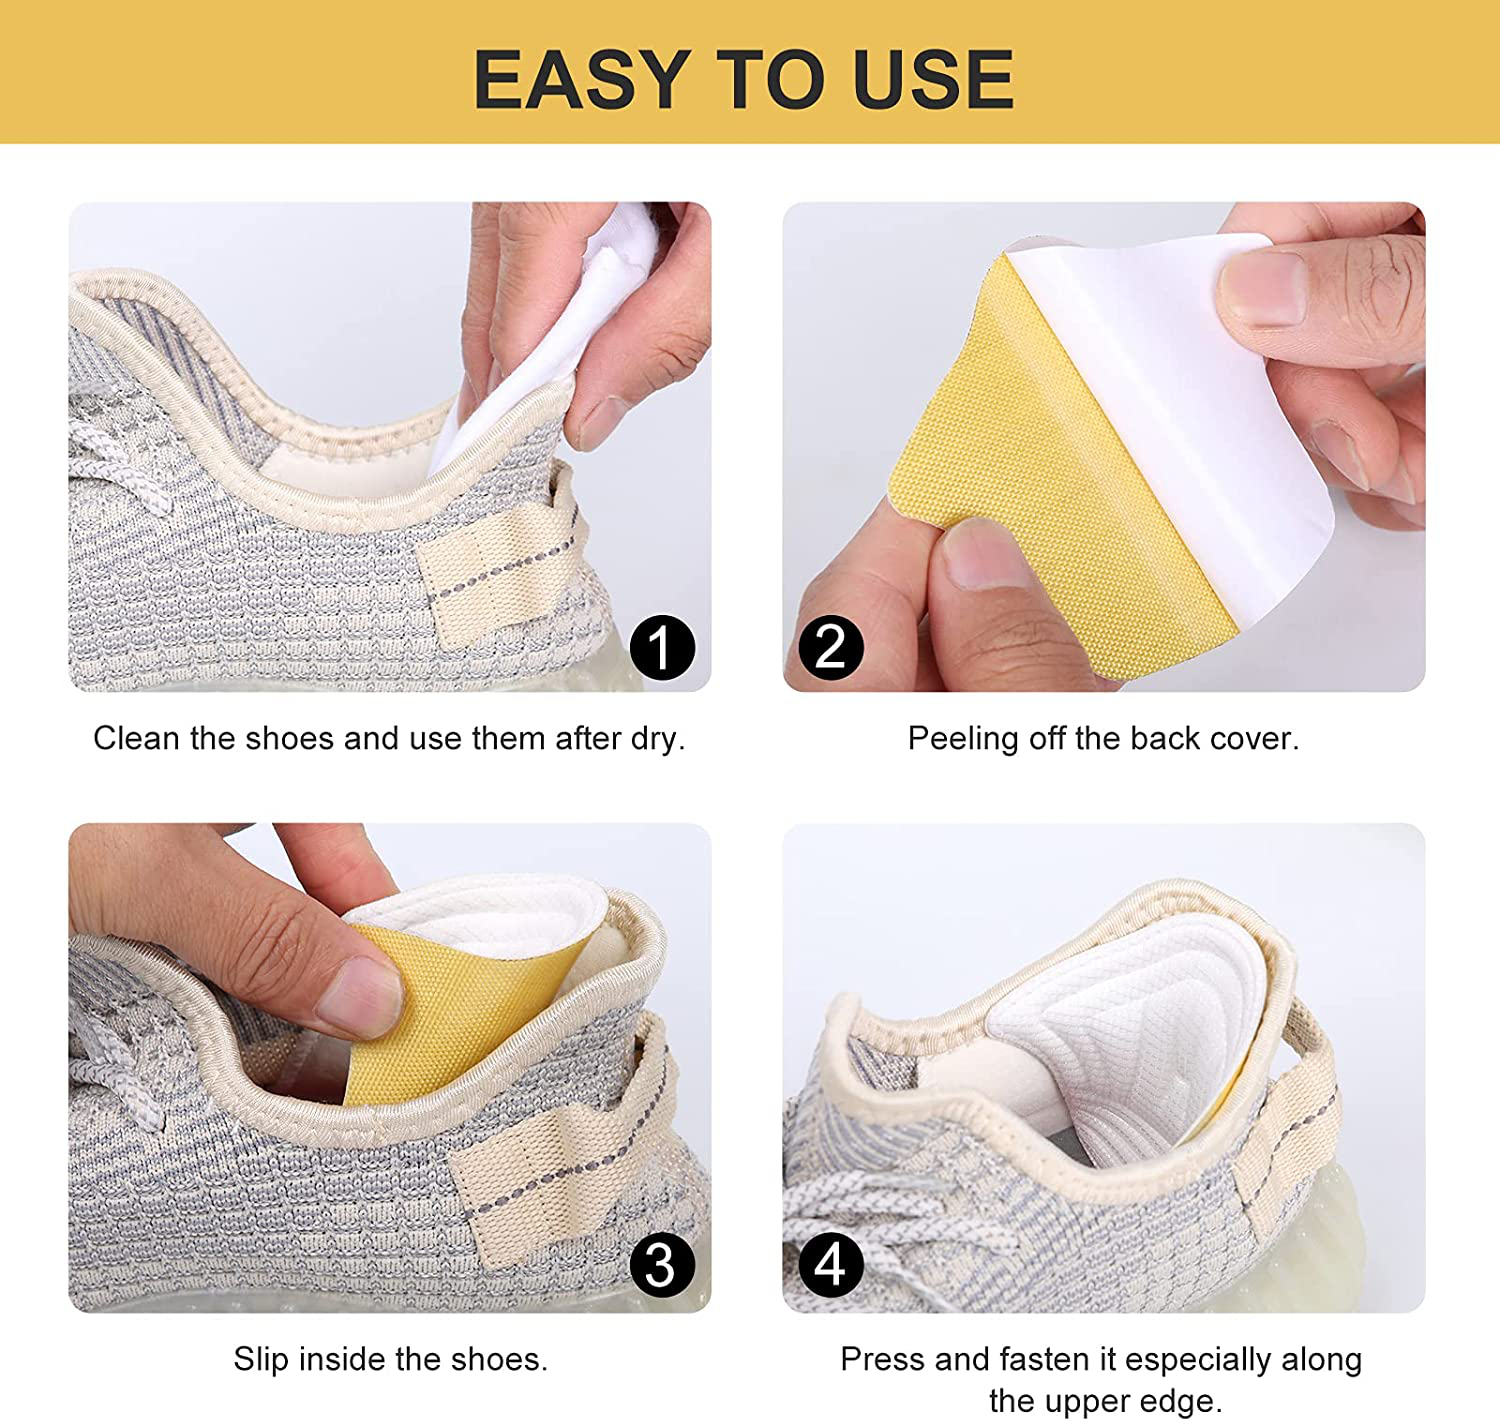 Heel Cushion Pads Heel Grips Liner Self-Adhesive Insoles Men/Women Foot Care Protector Inserts for Loose Shoes Heel Slipping- Heel Pain Relief Blisters Callus